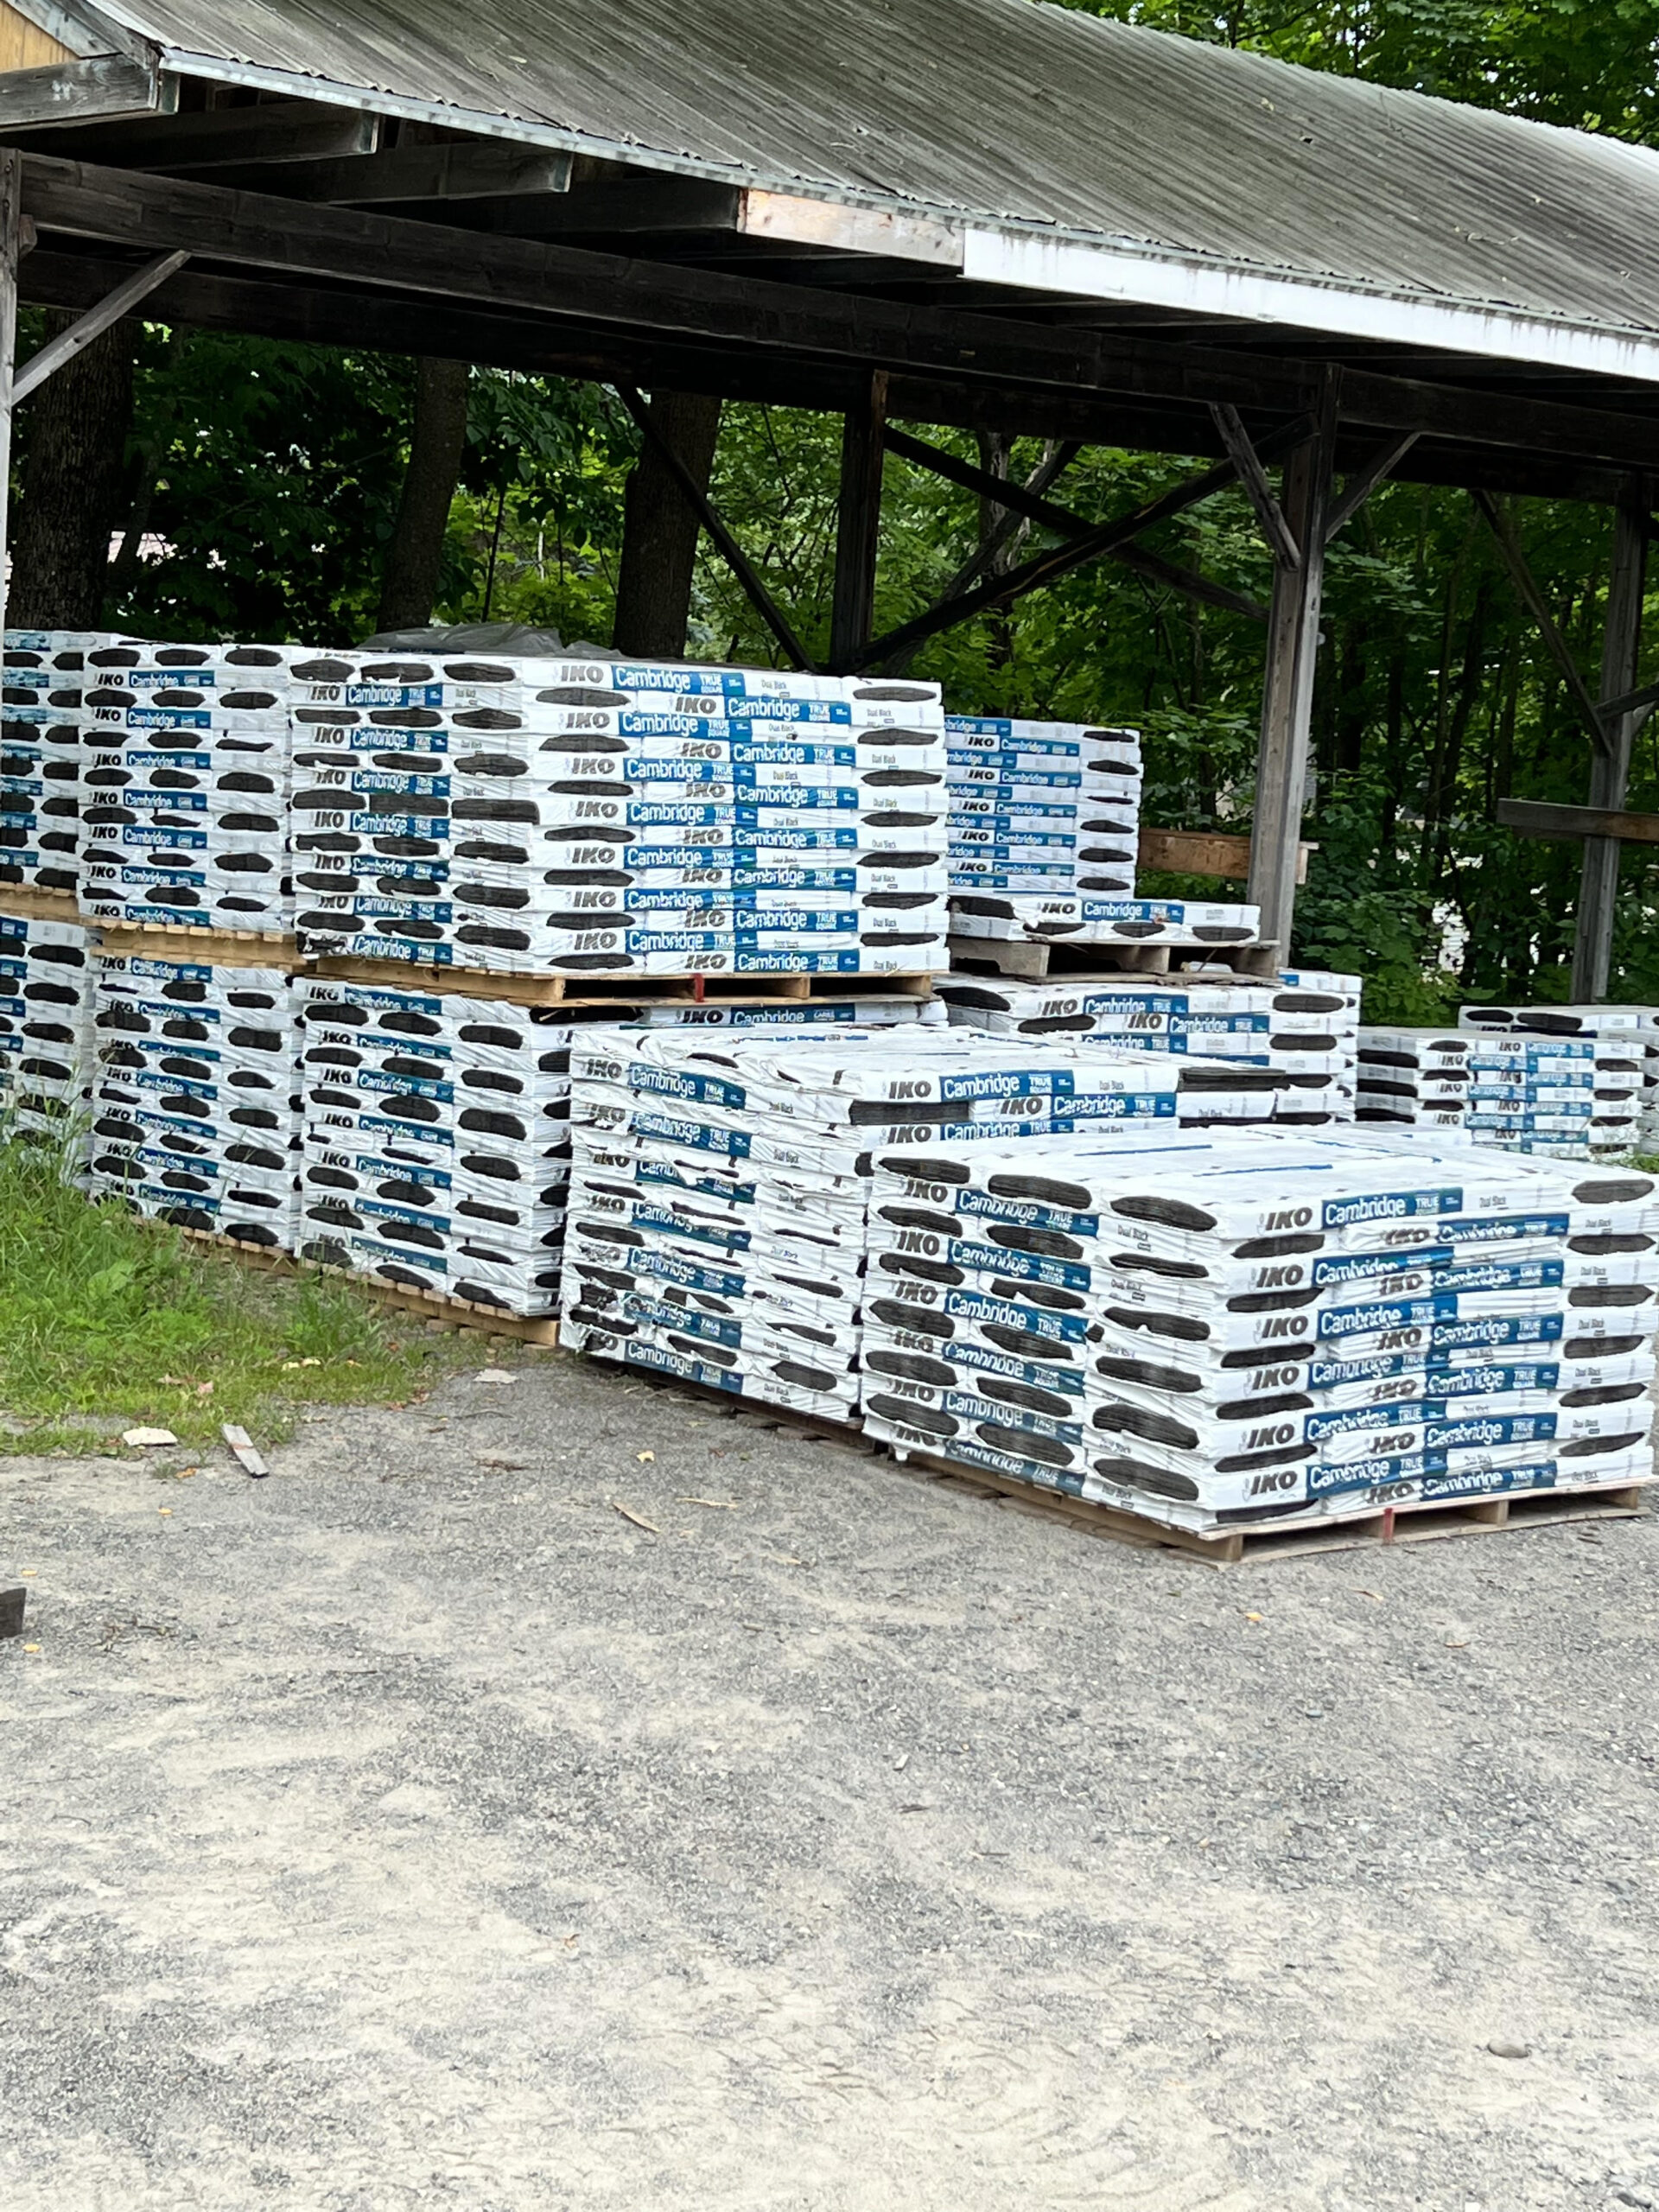 Roofing supplies at Harris Lumber